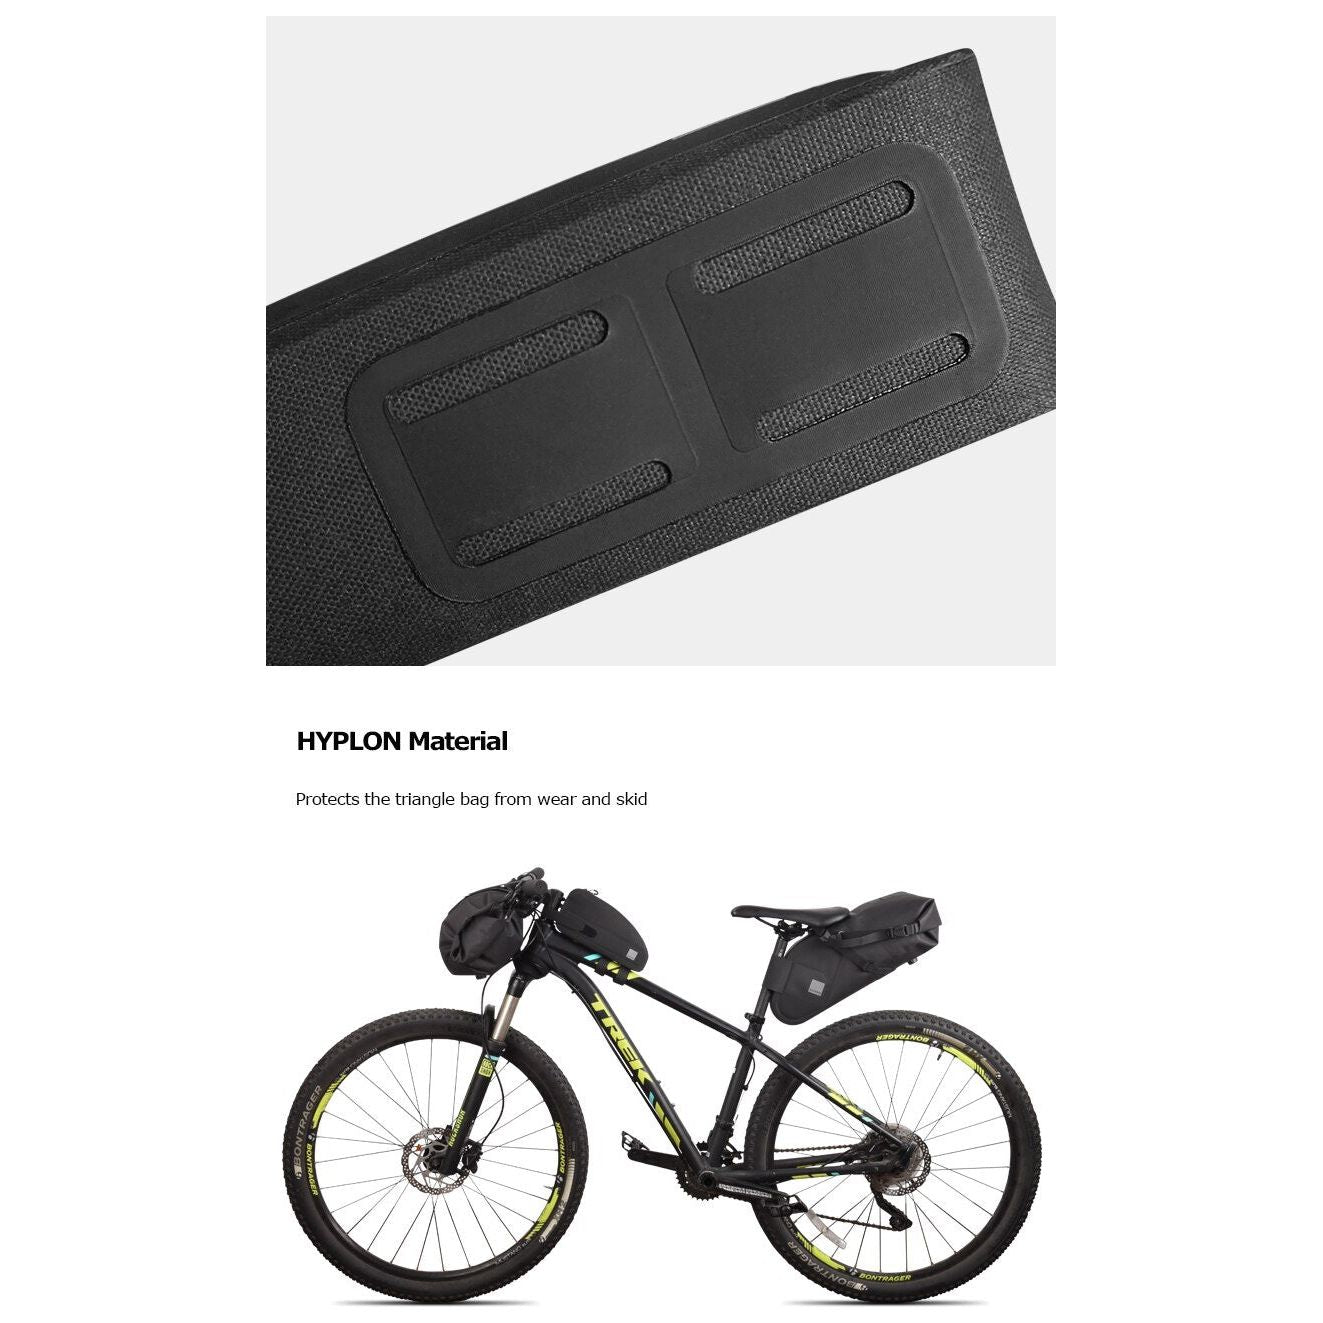 Bicycle Pouch front - Sunny Sydney Australia - Famous Outdoor Gear Store